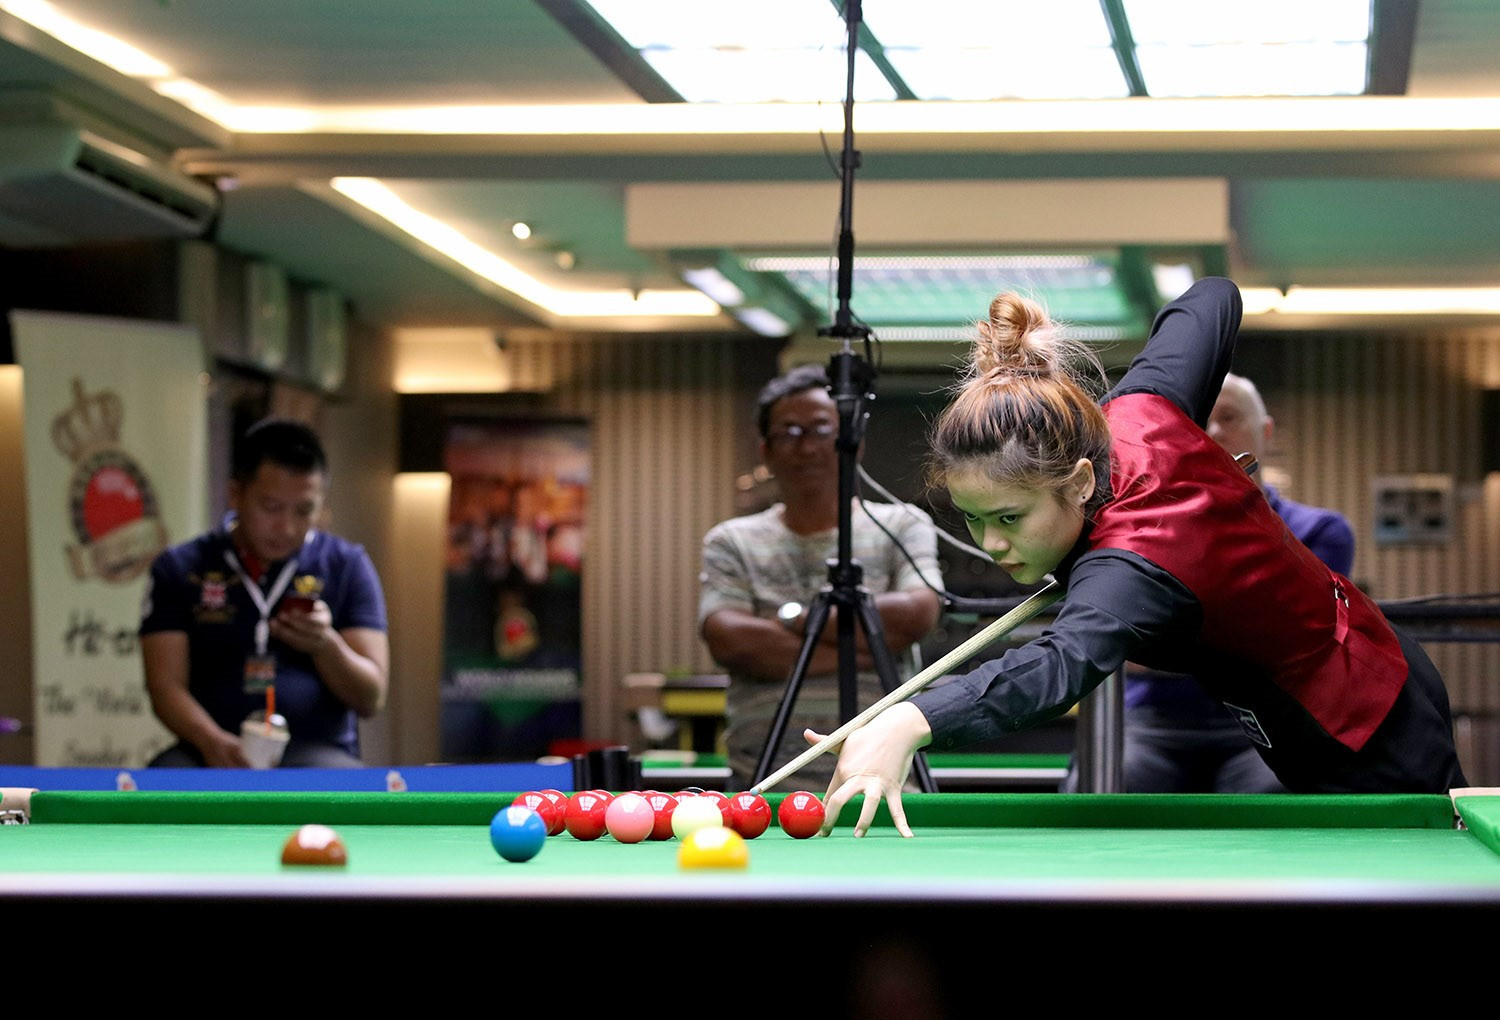 The World Women's Snooker Championship comes on the back of the inaugural Women's Snooker World Cup in Bangkok, where hosts Thailand triumphed ©WPBSA